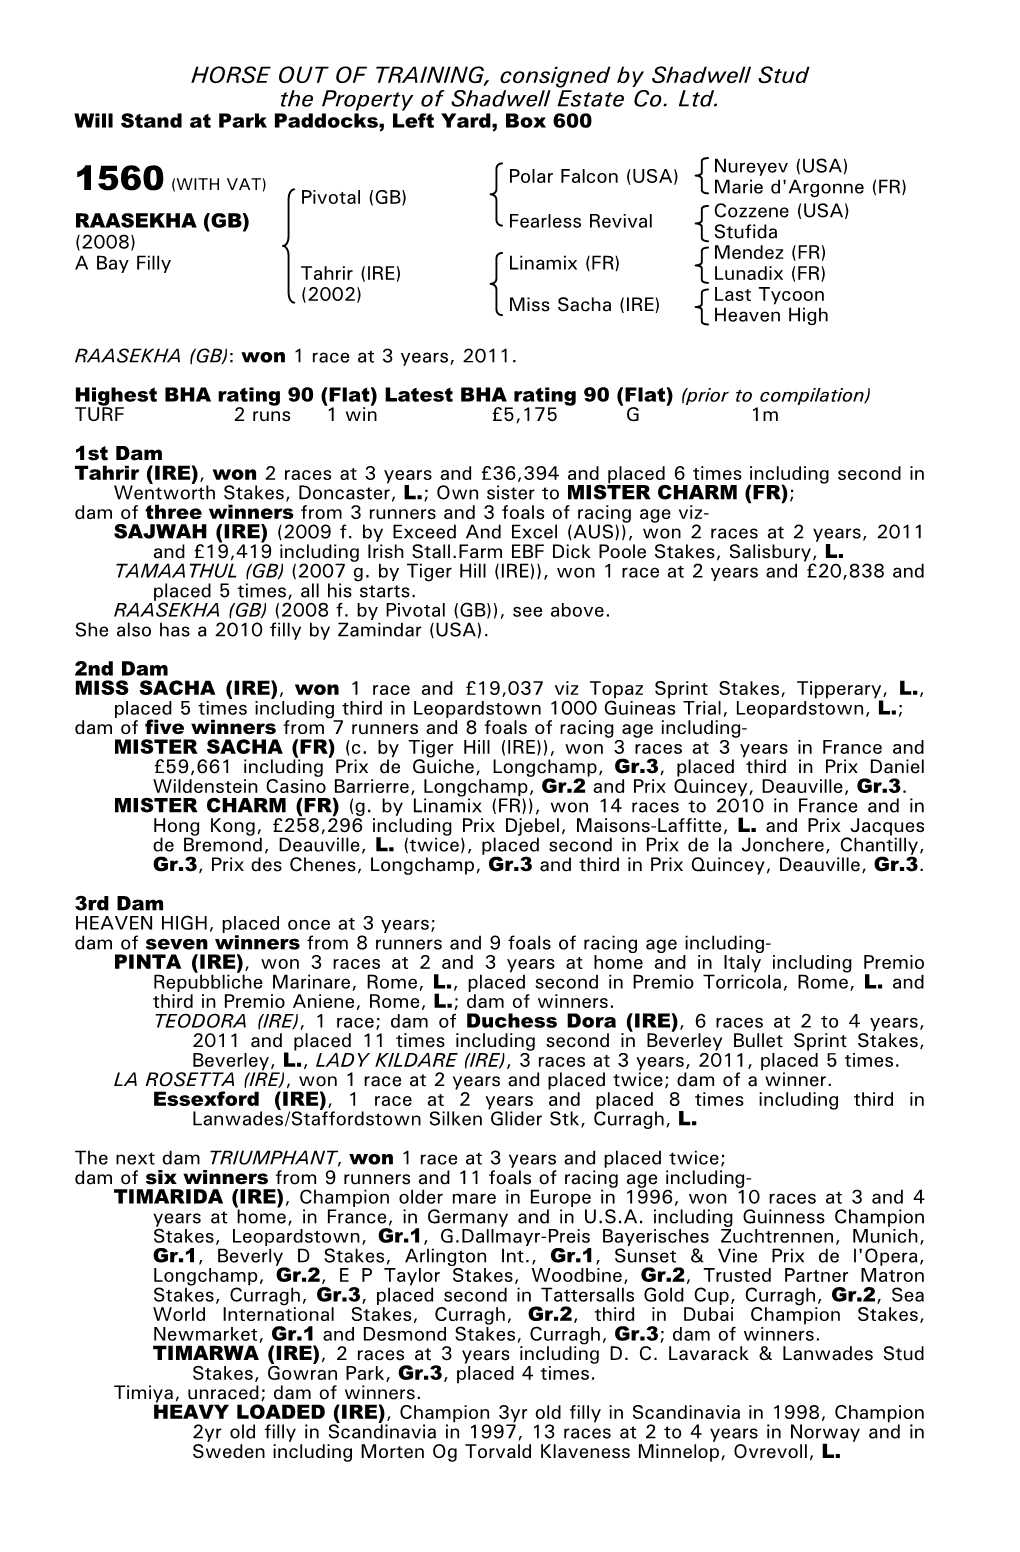 HORSE out of TRAINING, Consigned by Shadwell Stud the Property of Shadwell Estate Co